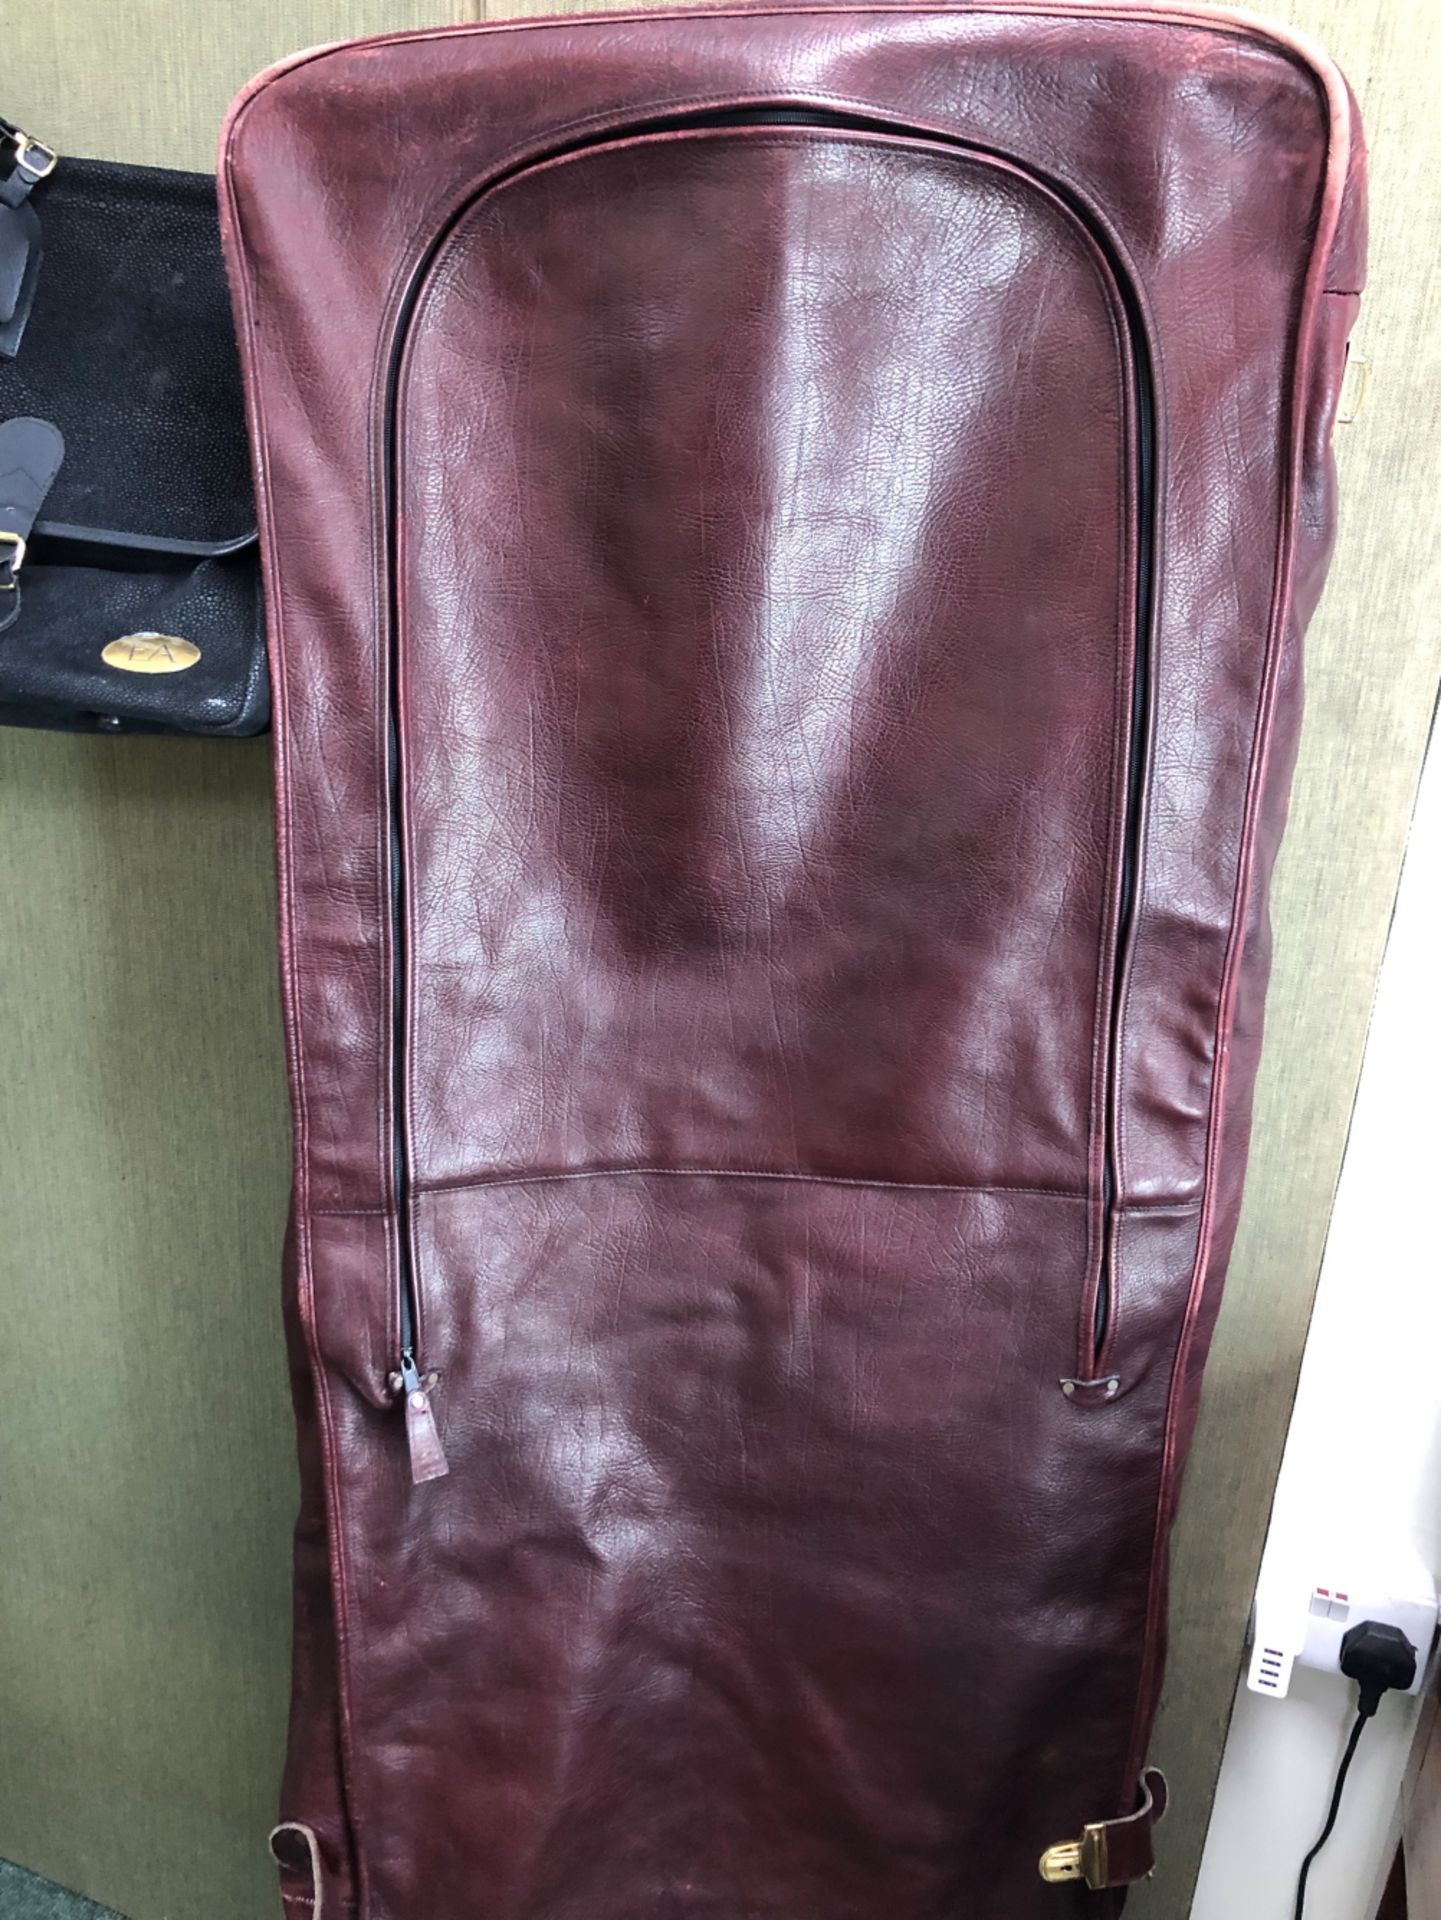 A BURGUNDY HEAVY LEATHER SUIT CARRIER WITH A BLACK SUEDETTE TRAVEL BAG (2) - Image 9 of 10